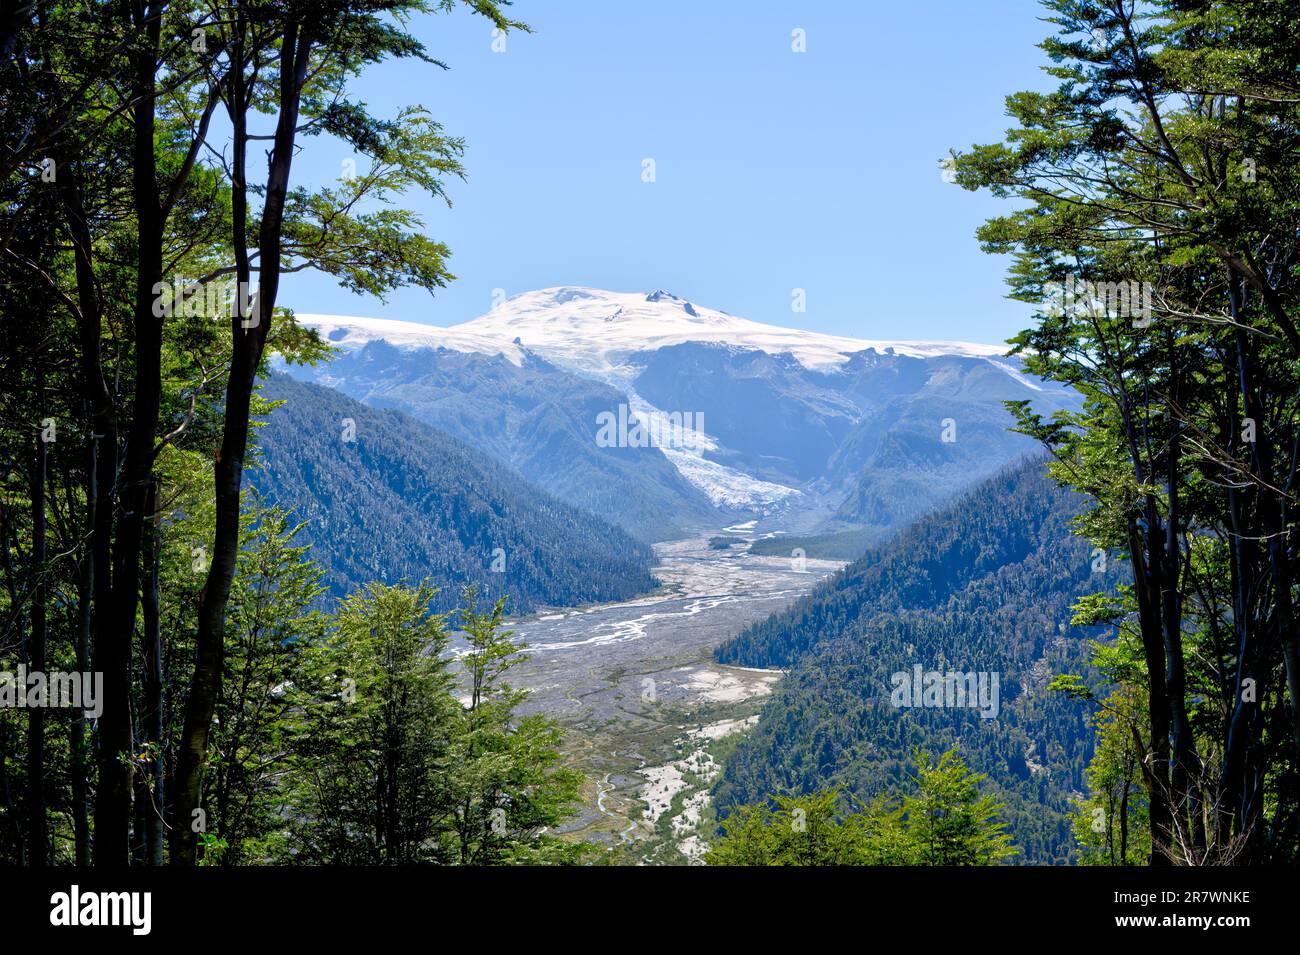 Spectacular landscape with mountains, glaciers and lakes of Pumalin National Park in Chilean Patagonia Stock Photo